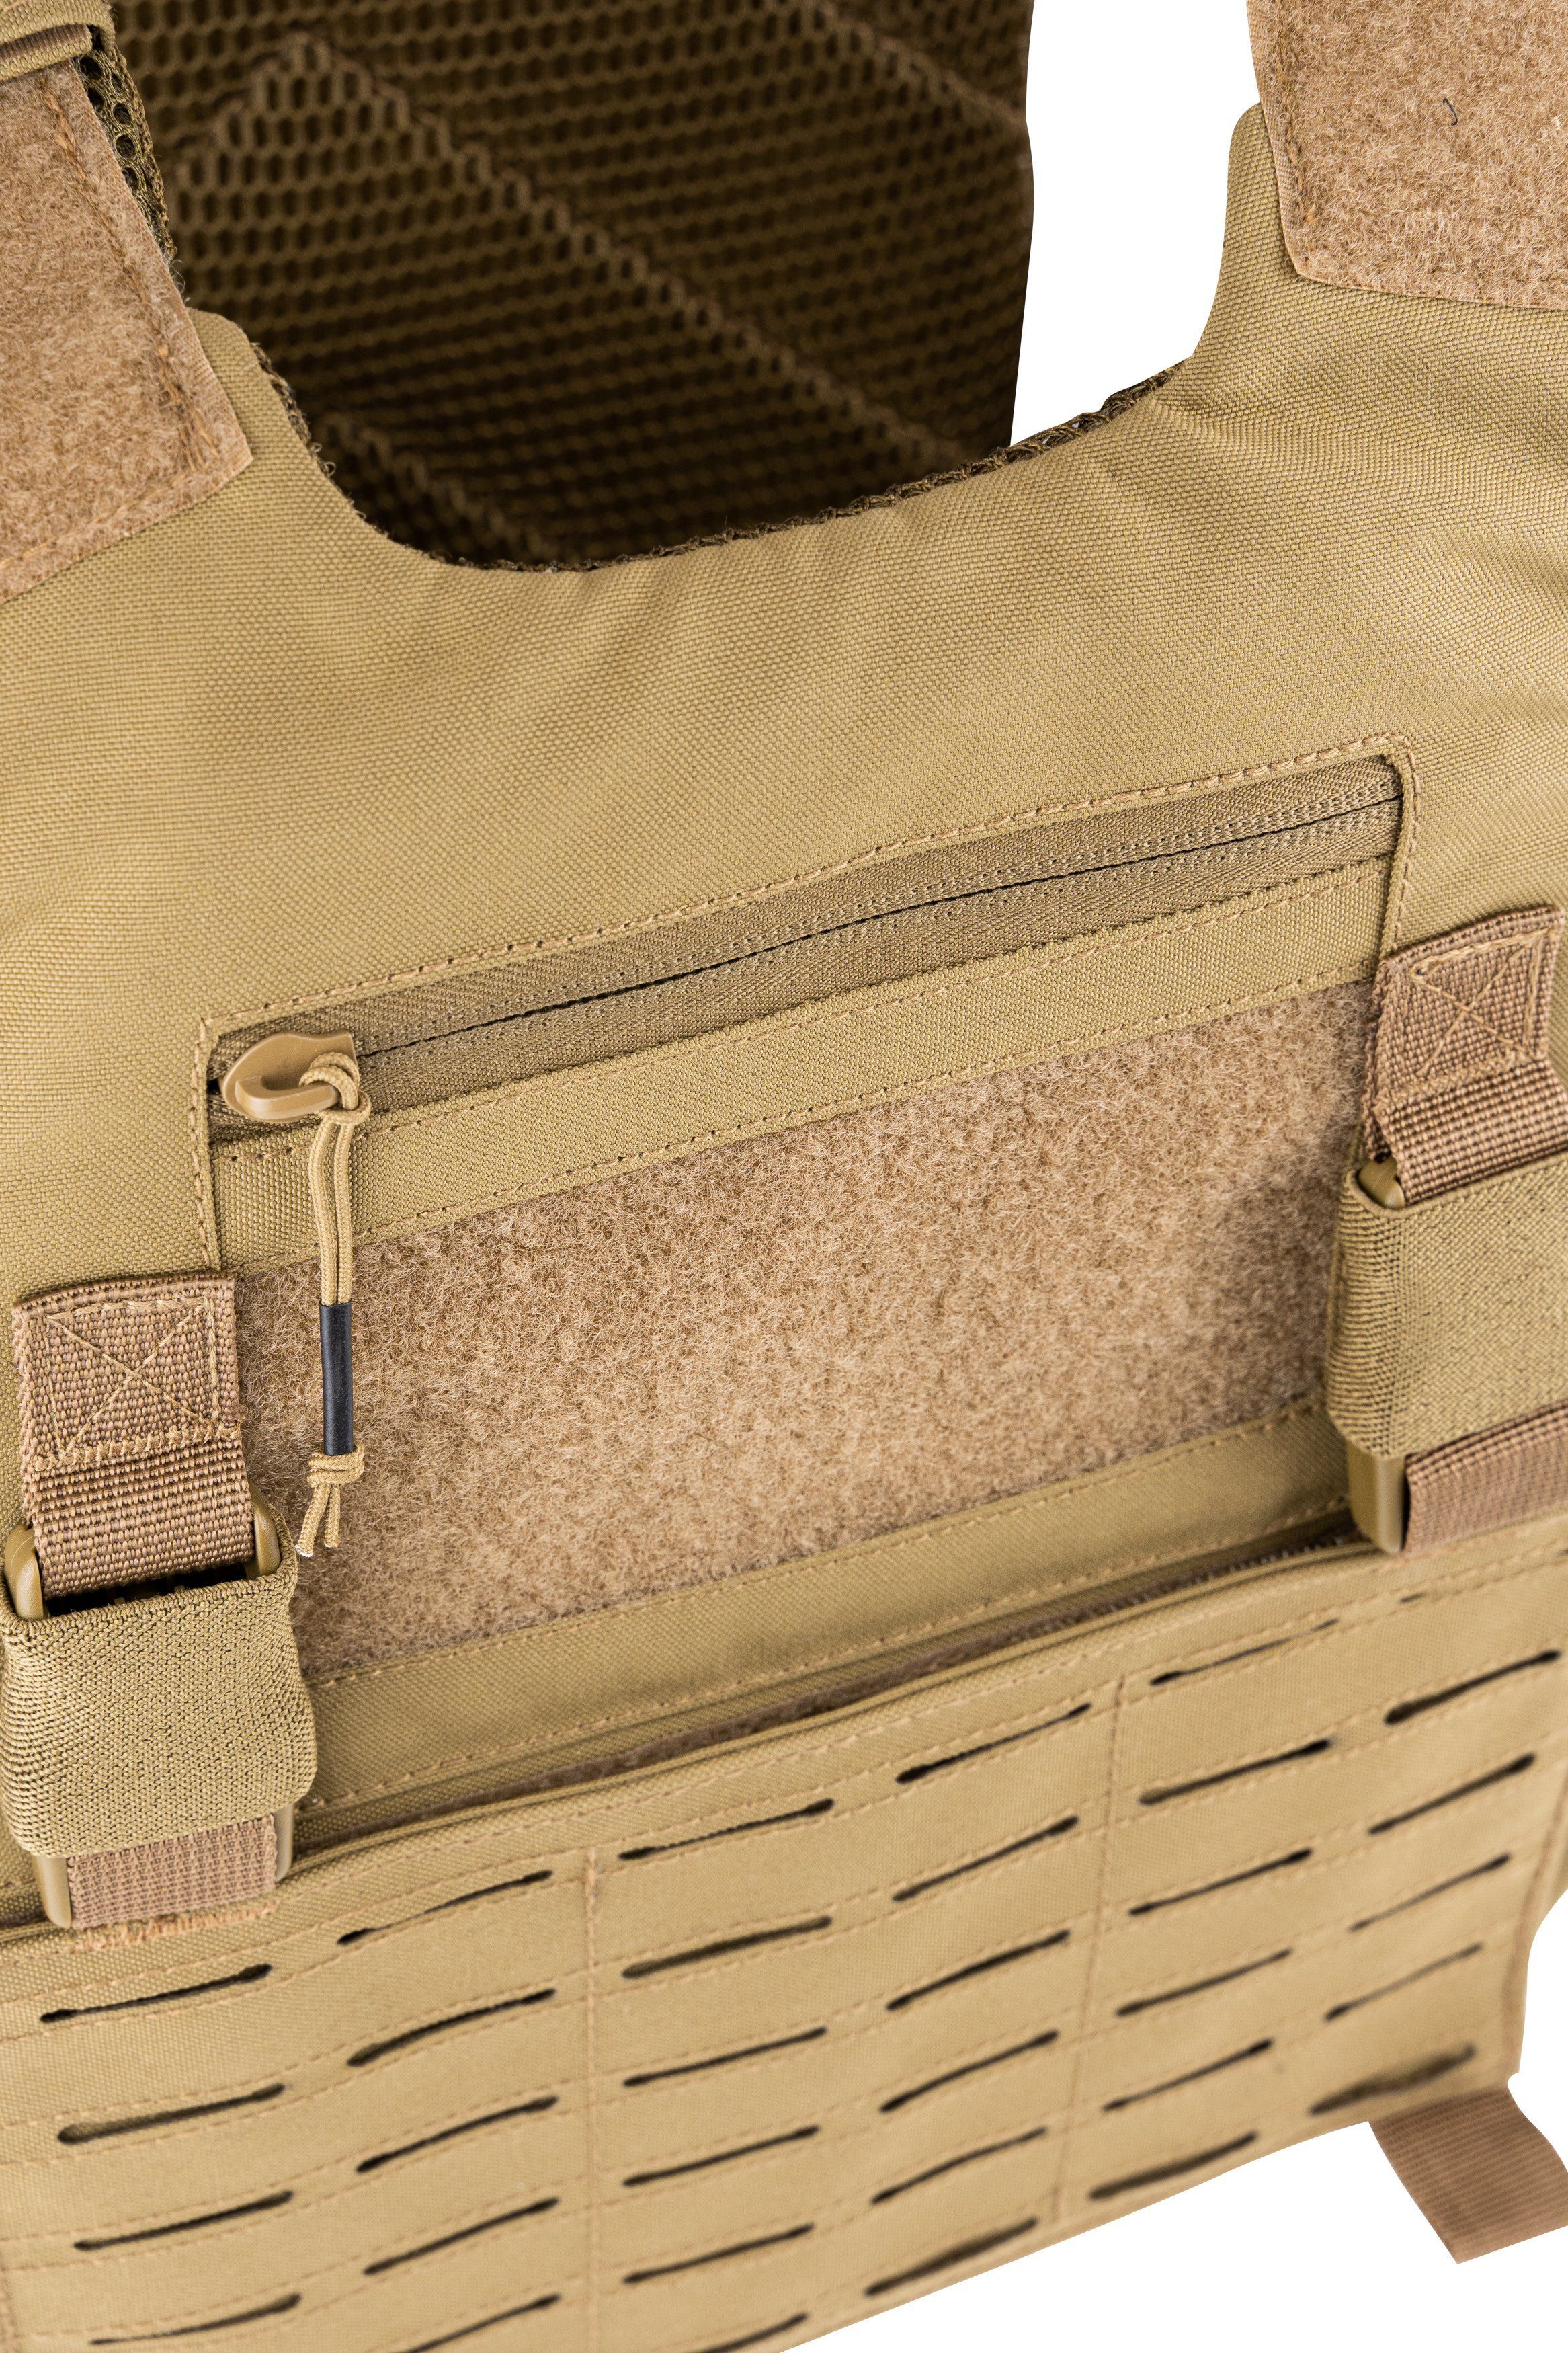 Viper VX Buckle Up Plate Carrier GEN2 - Coyote